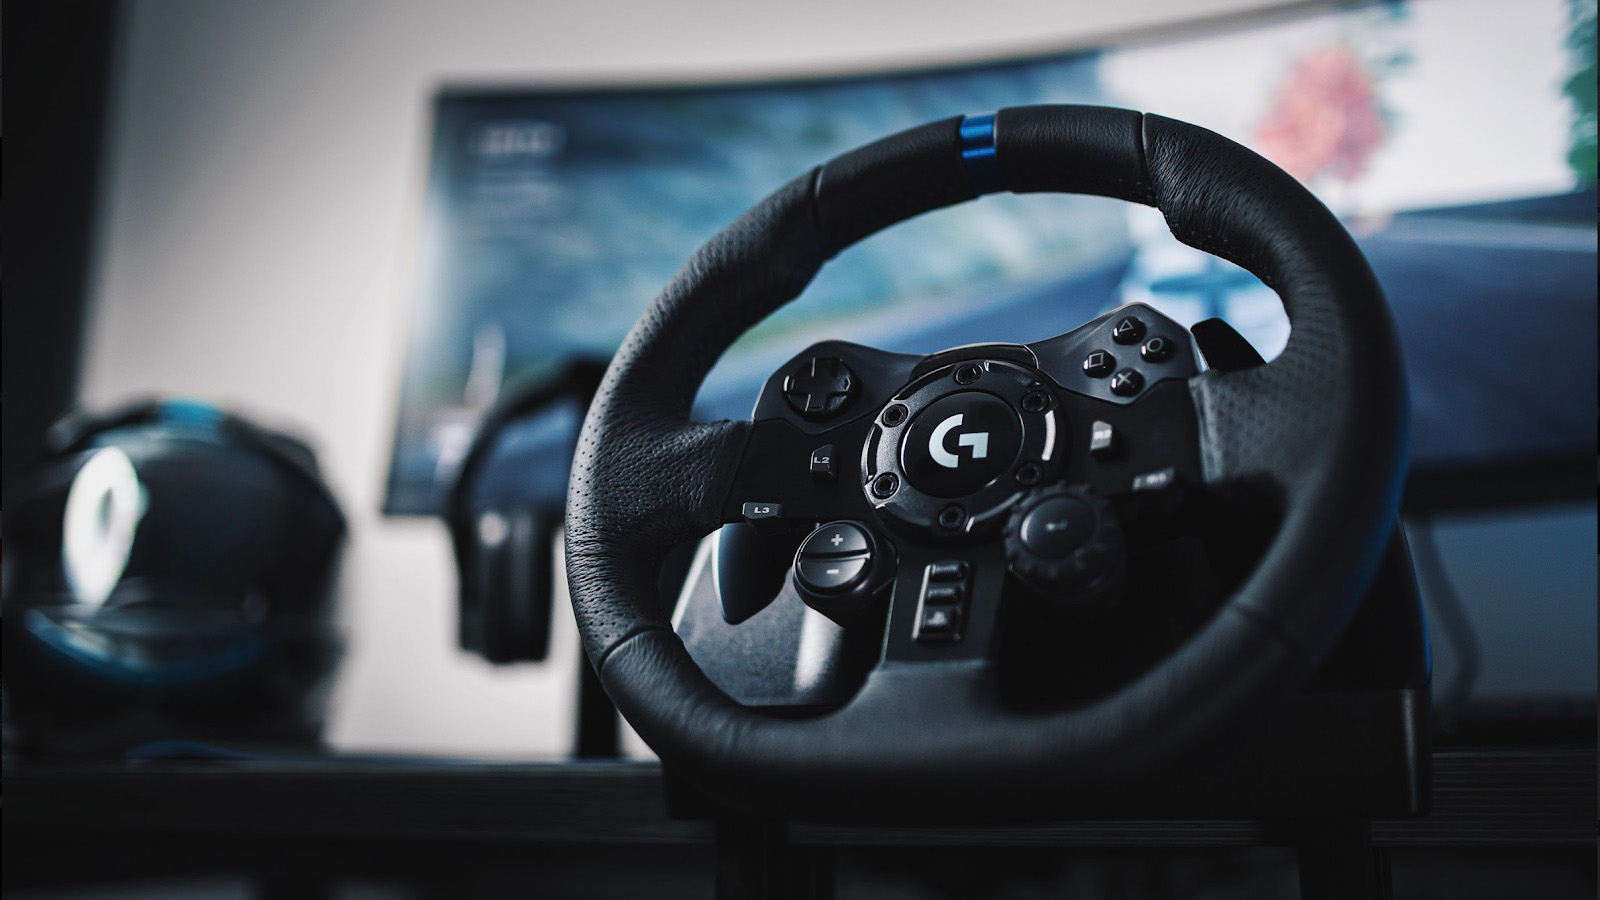 The Logitech G923 racing wheel with a curved monitor in the background.